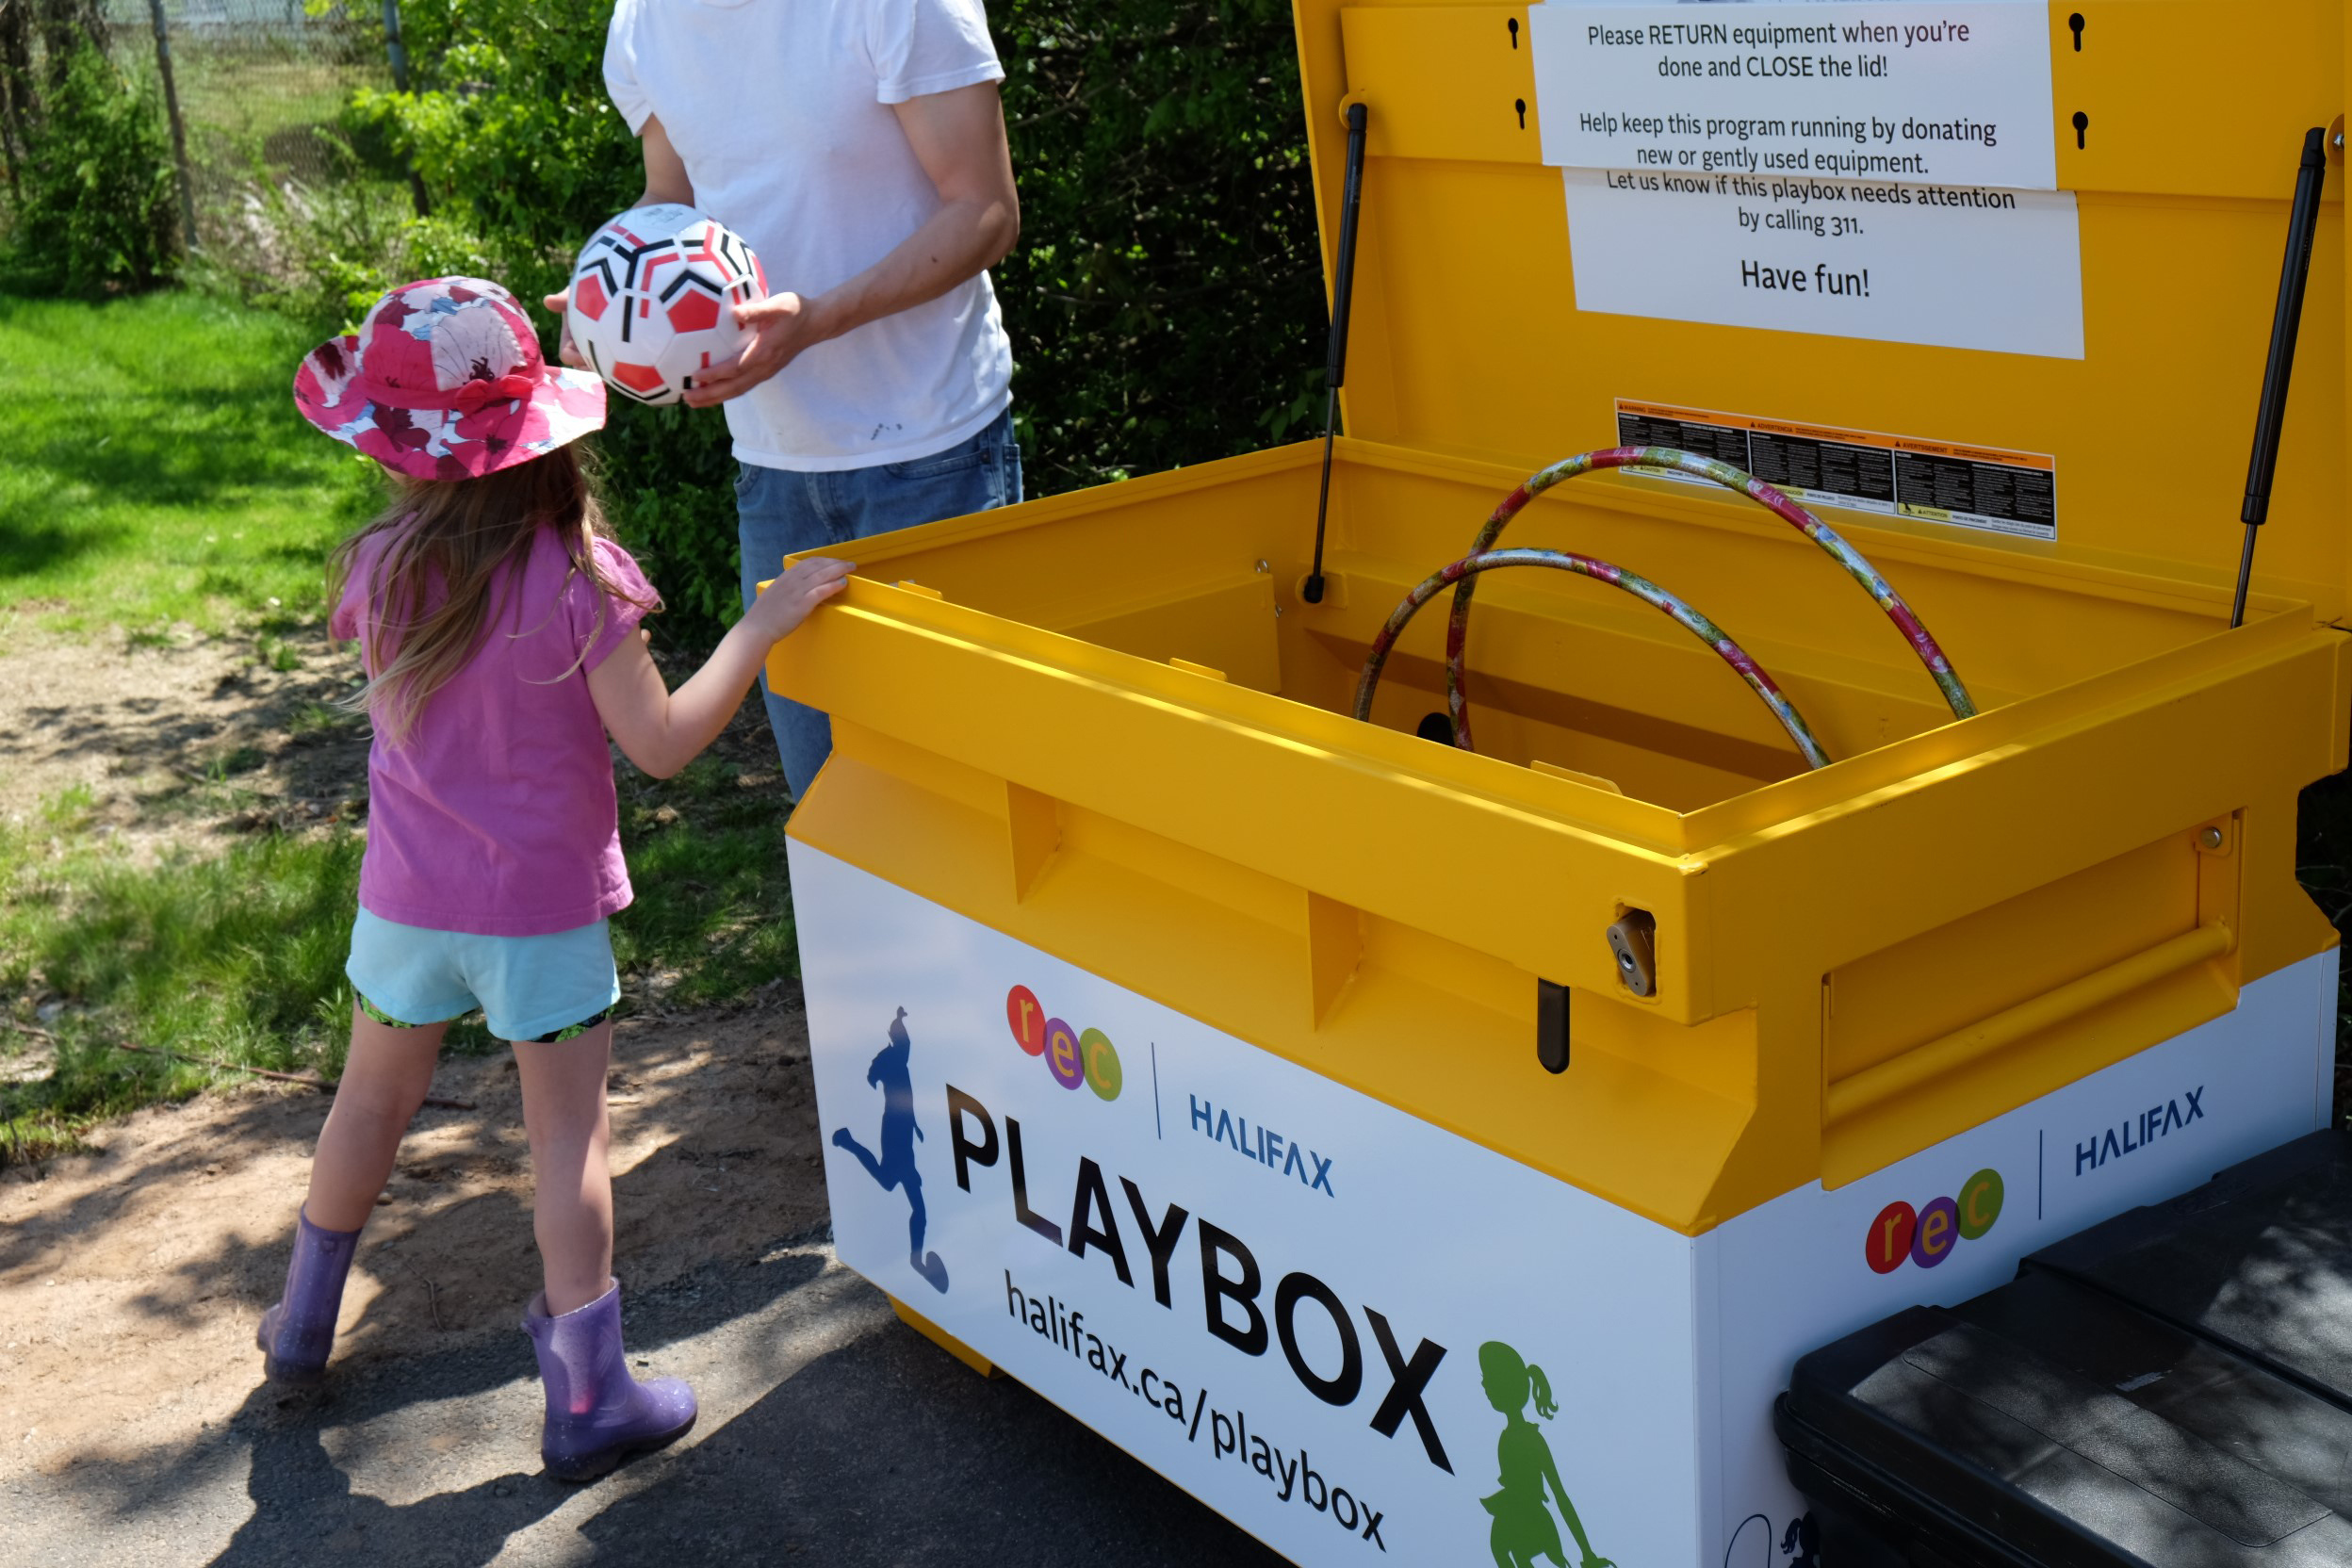 A child and parent borrowing a soccer ball from the playbox